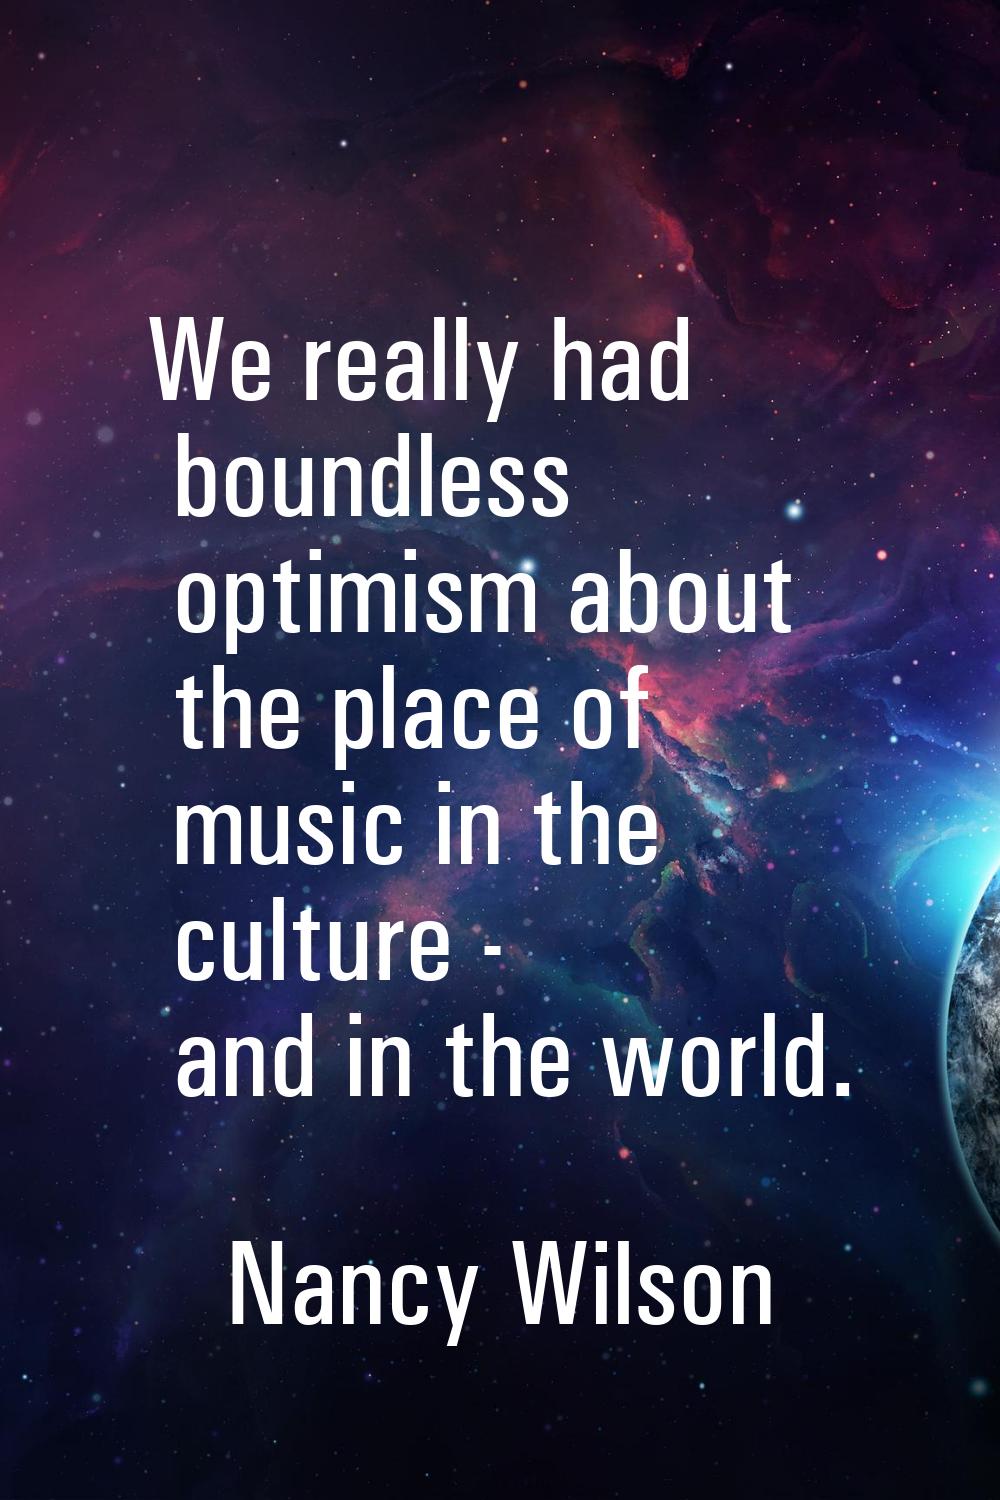 We really had boundless optimism about the place of music in the culture - and in the world.